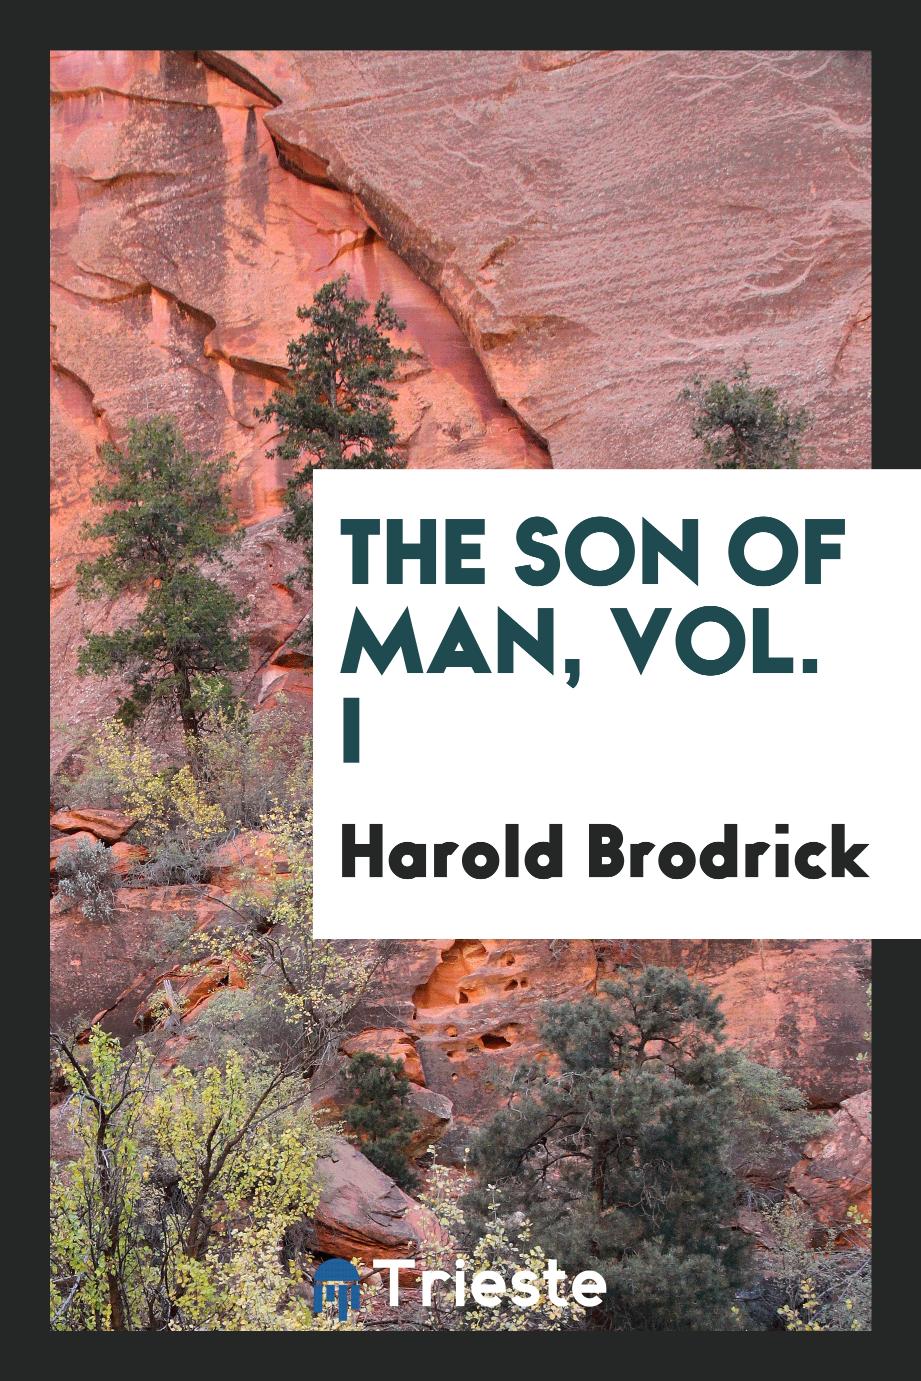 The Son of Man, Vol. I